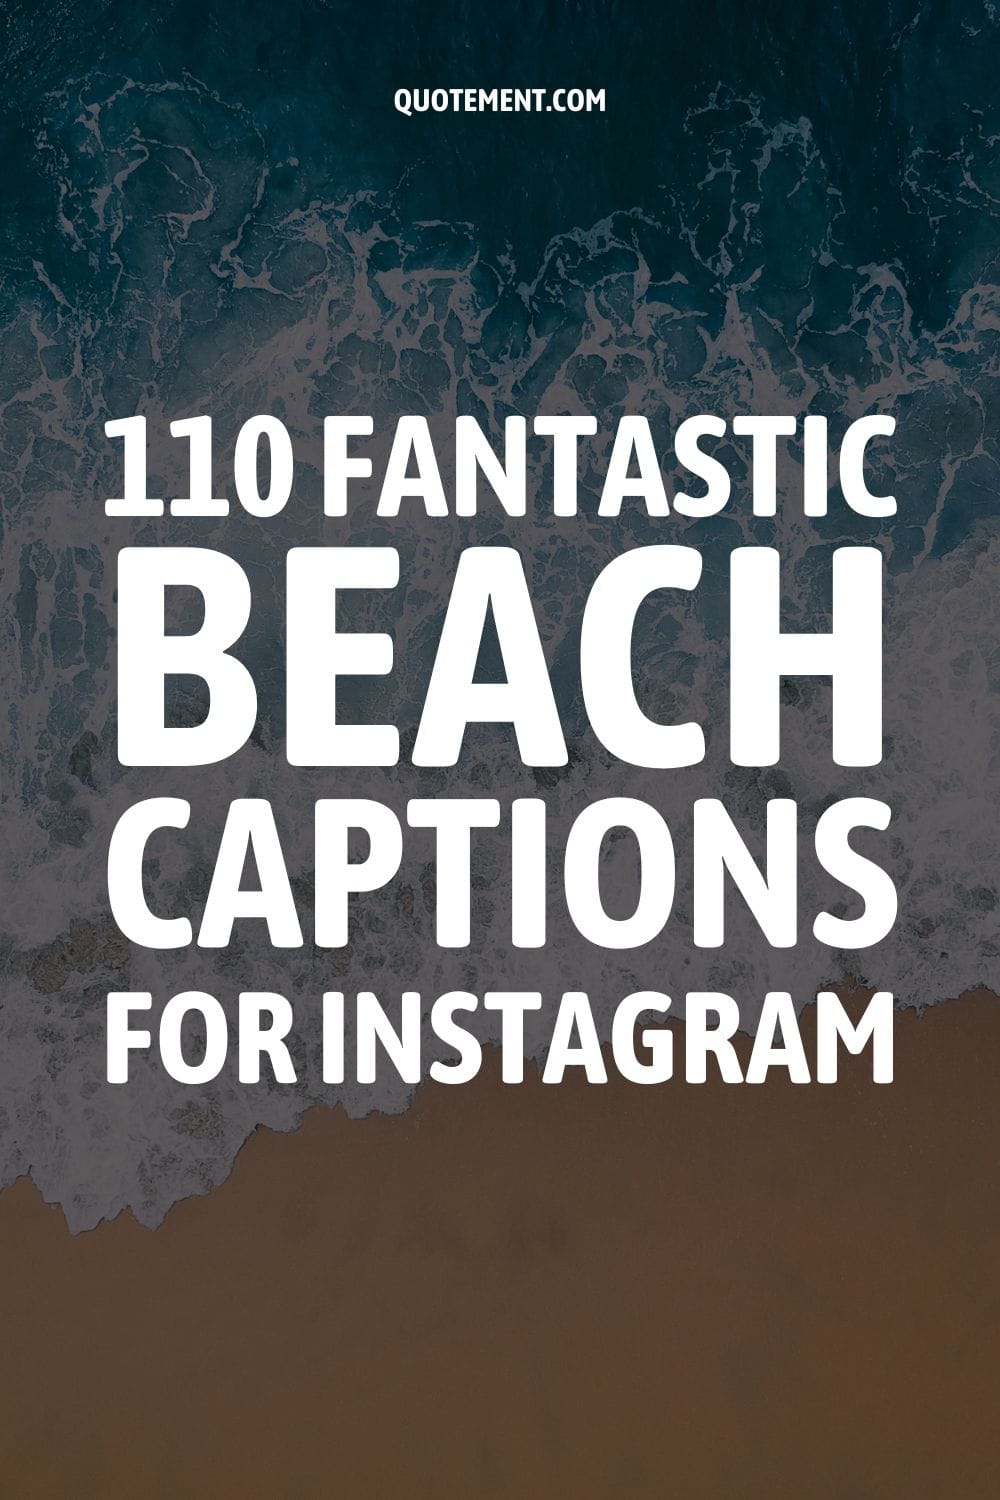 110 Beach Captions For Instagram To Share Summer Vibes
